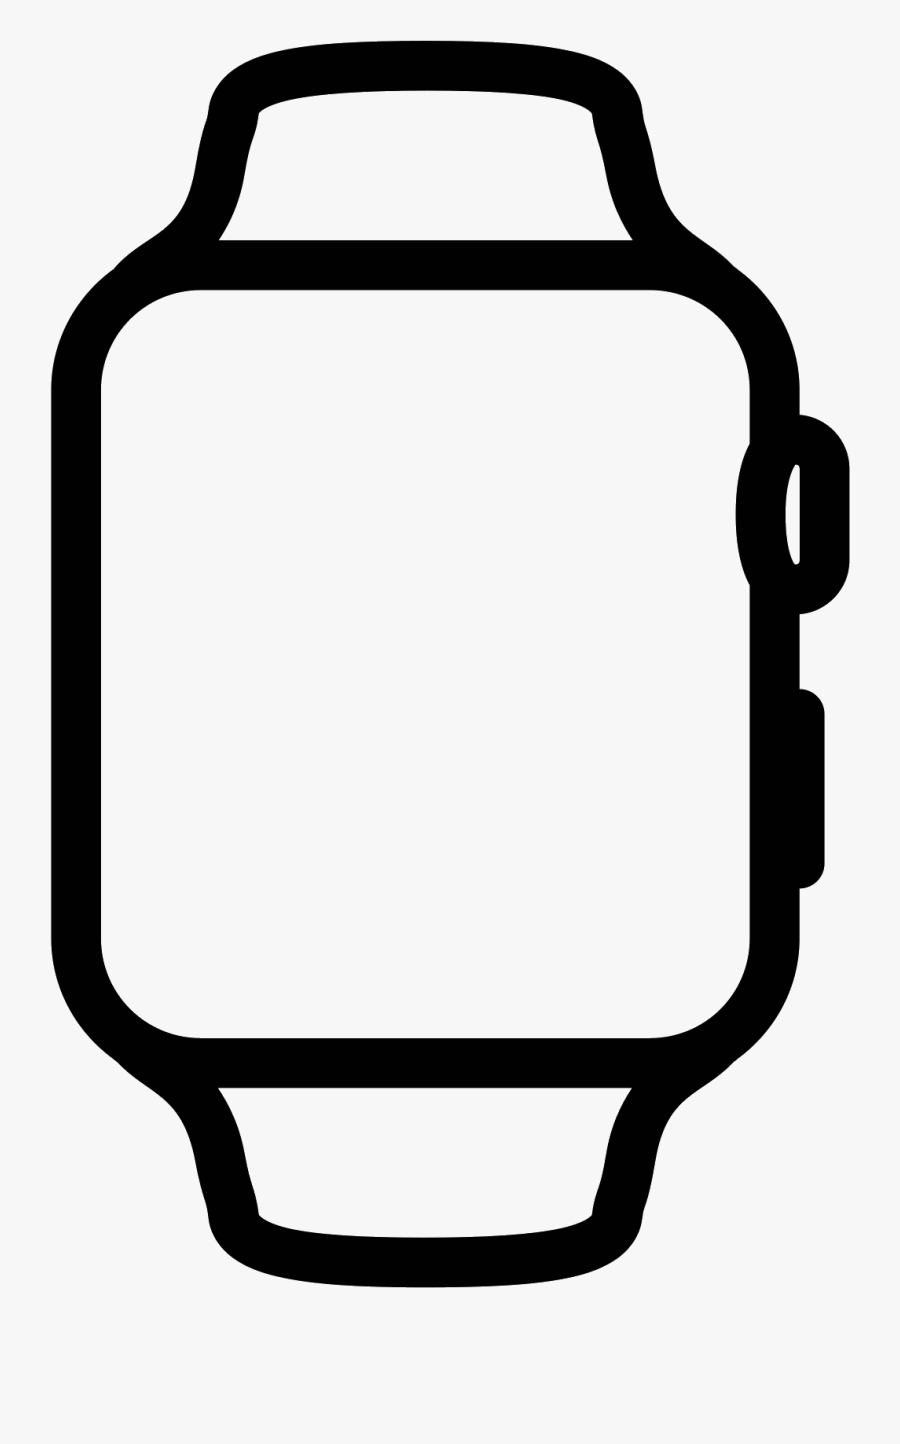 Watch Clipart Wach - Apple Watch Free Icon, Transparent Clipart